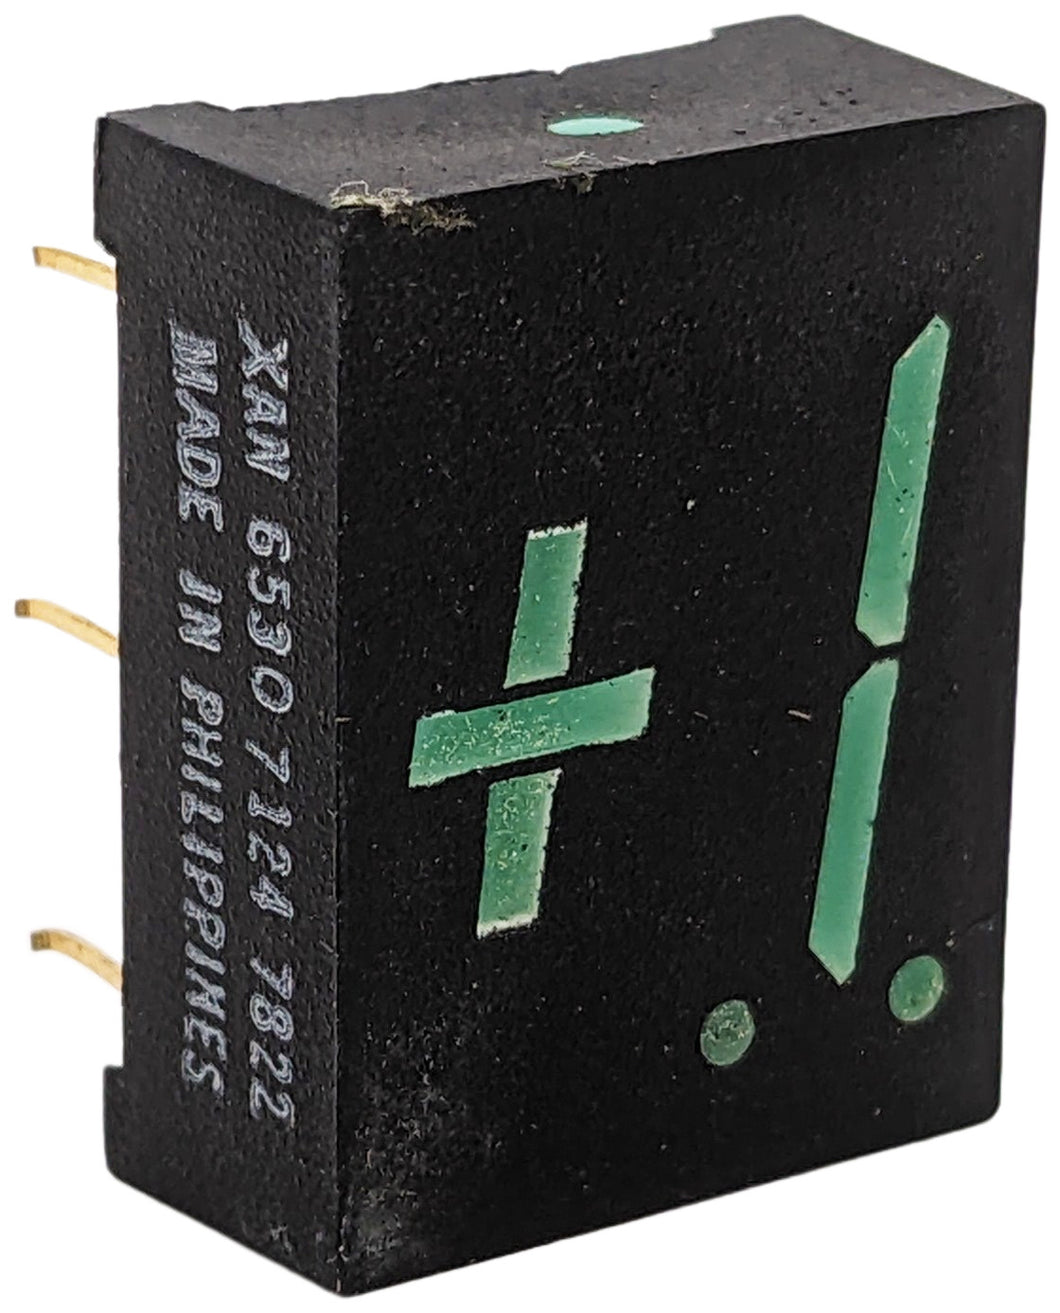 0.6 Inch Green 7 Segment Display ±1 Overflow Character, Common Anode (Size: 0.68